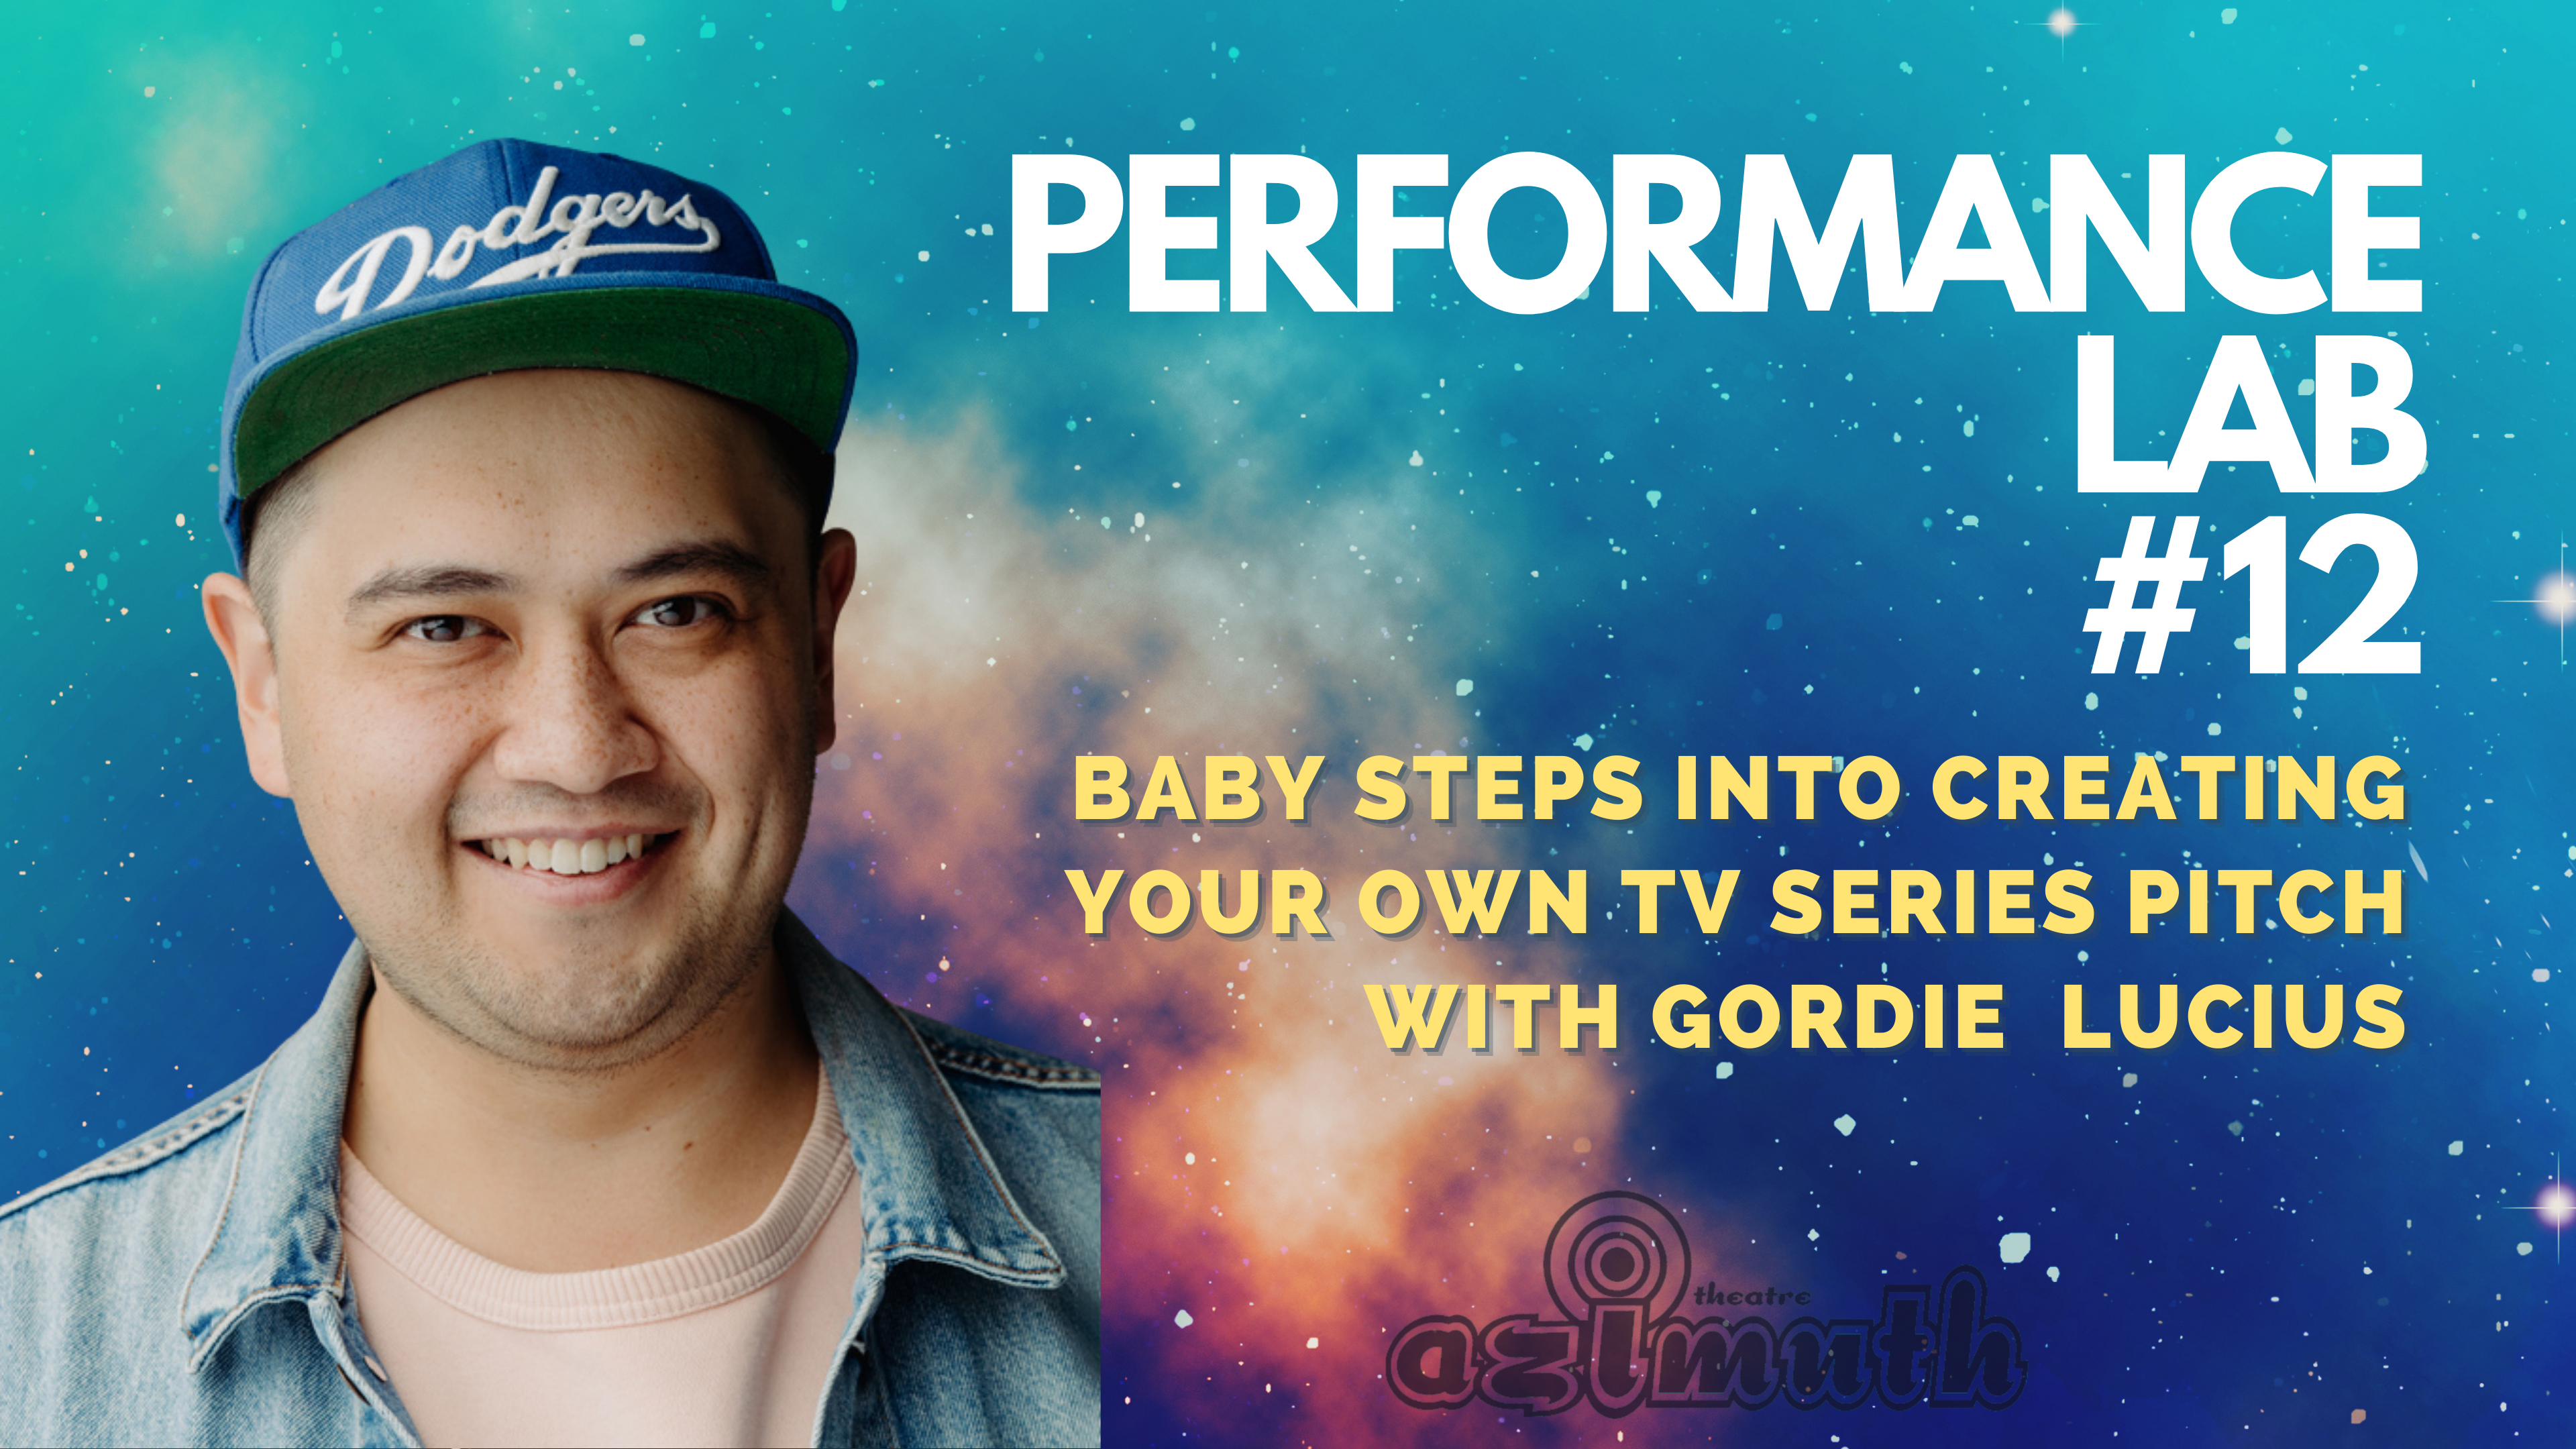 "ALT TEXT: Gordie Lucius, with the text PERFORMANCE LAB #12, Baby Steps into Creating Your Own TV Series Pitch with Gordie Lucius, Link in Bio. Gordie and text are layered on a background of a bright blue, indigo and orange galaxy. "